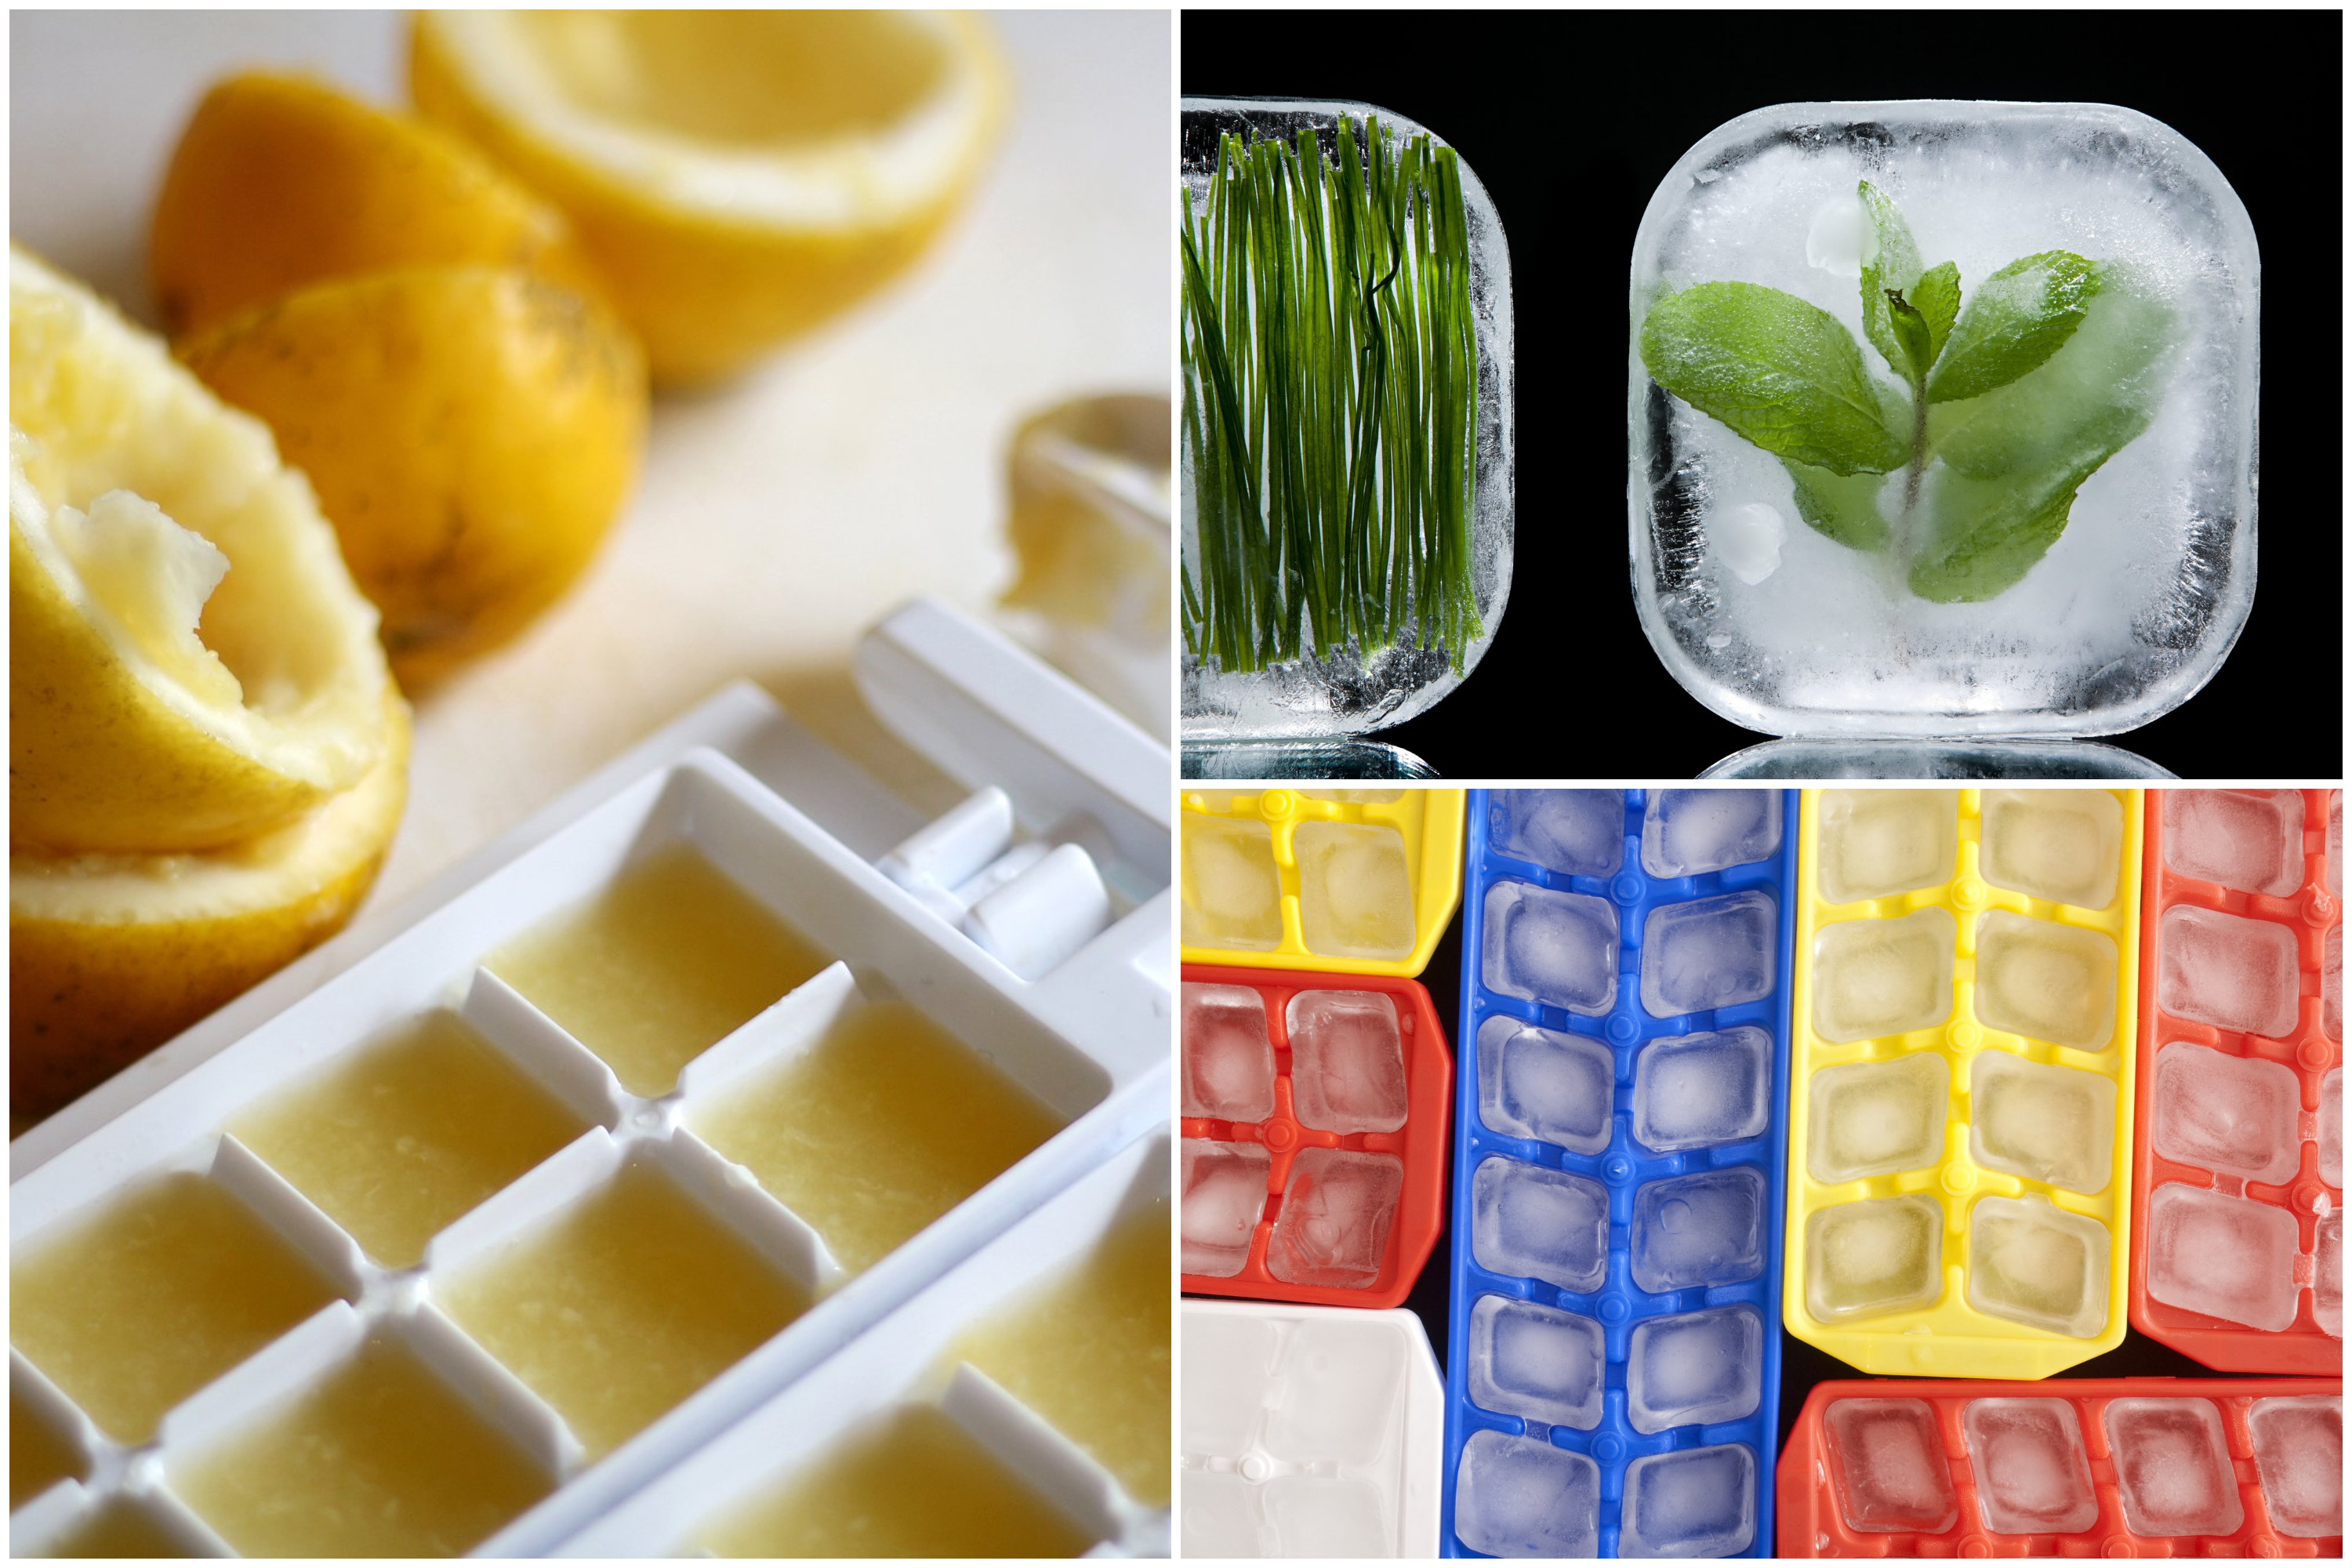 Mini Ice Cube Trays with Lid - Small Ice Cube Trays for Freezer,Ice Trays  for Freezer Silicone,Small Square Ice Cube Mold,Tiny Little Ice Cube Trays